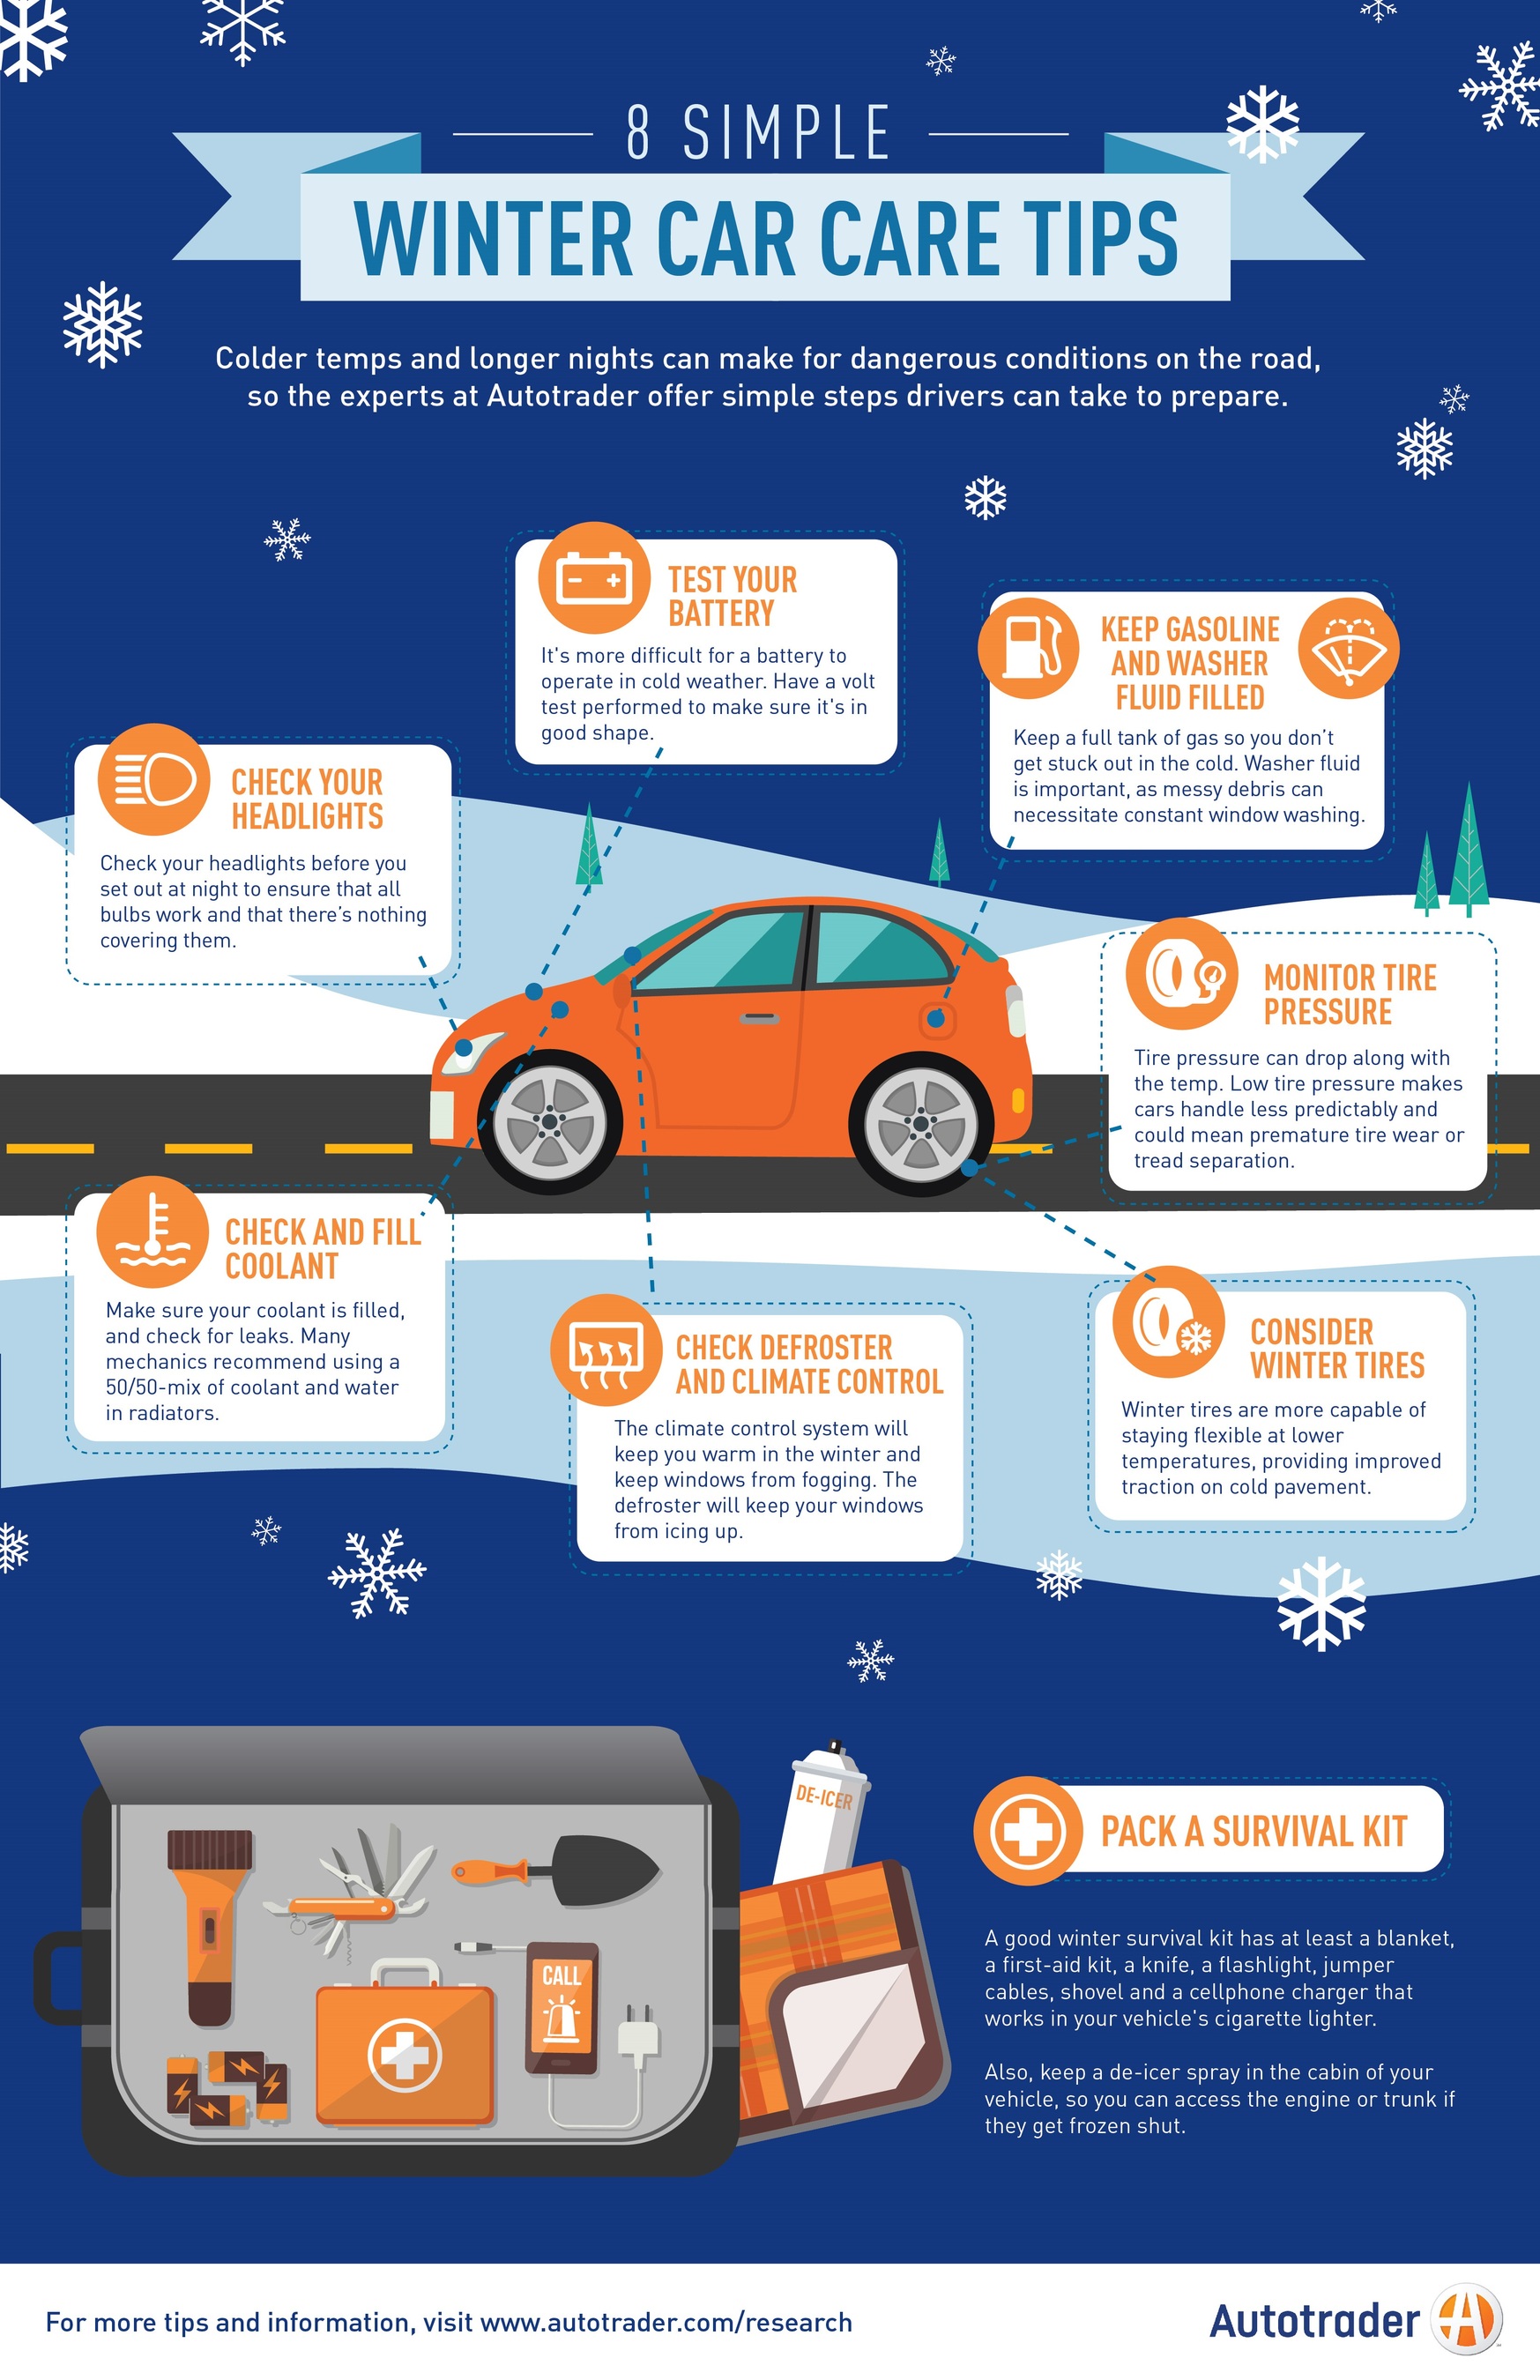 Know Before You Go How to Prepare Your Car for Winter